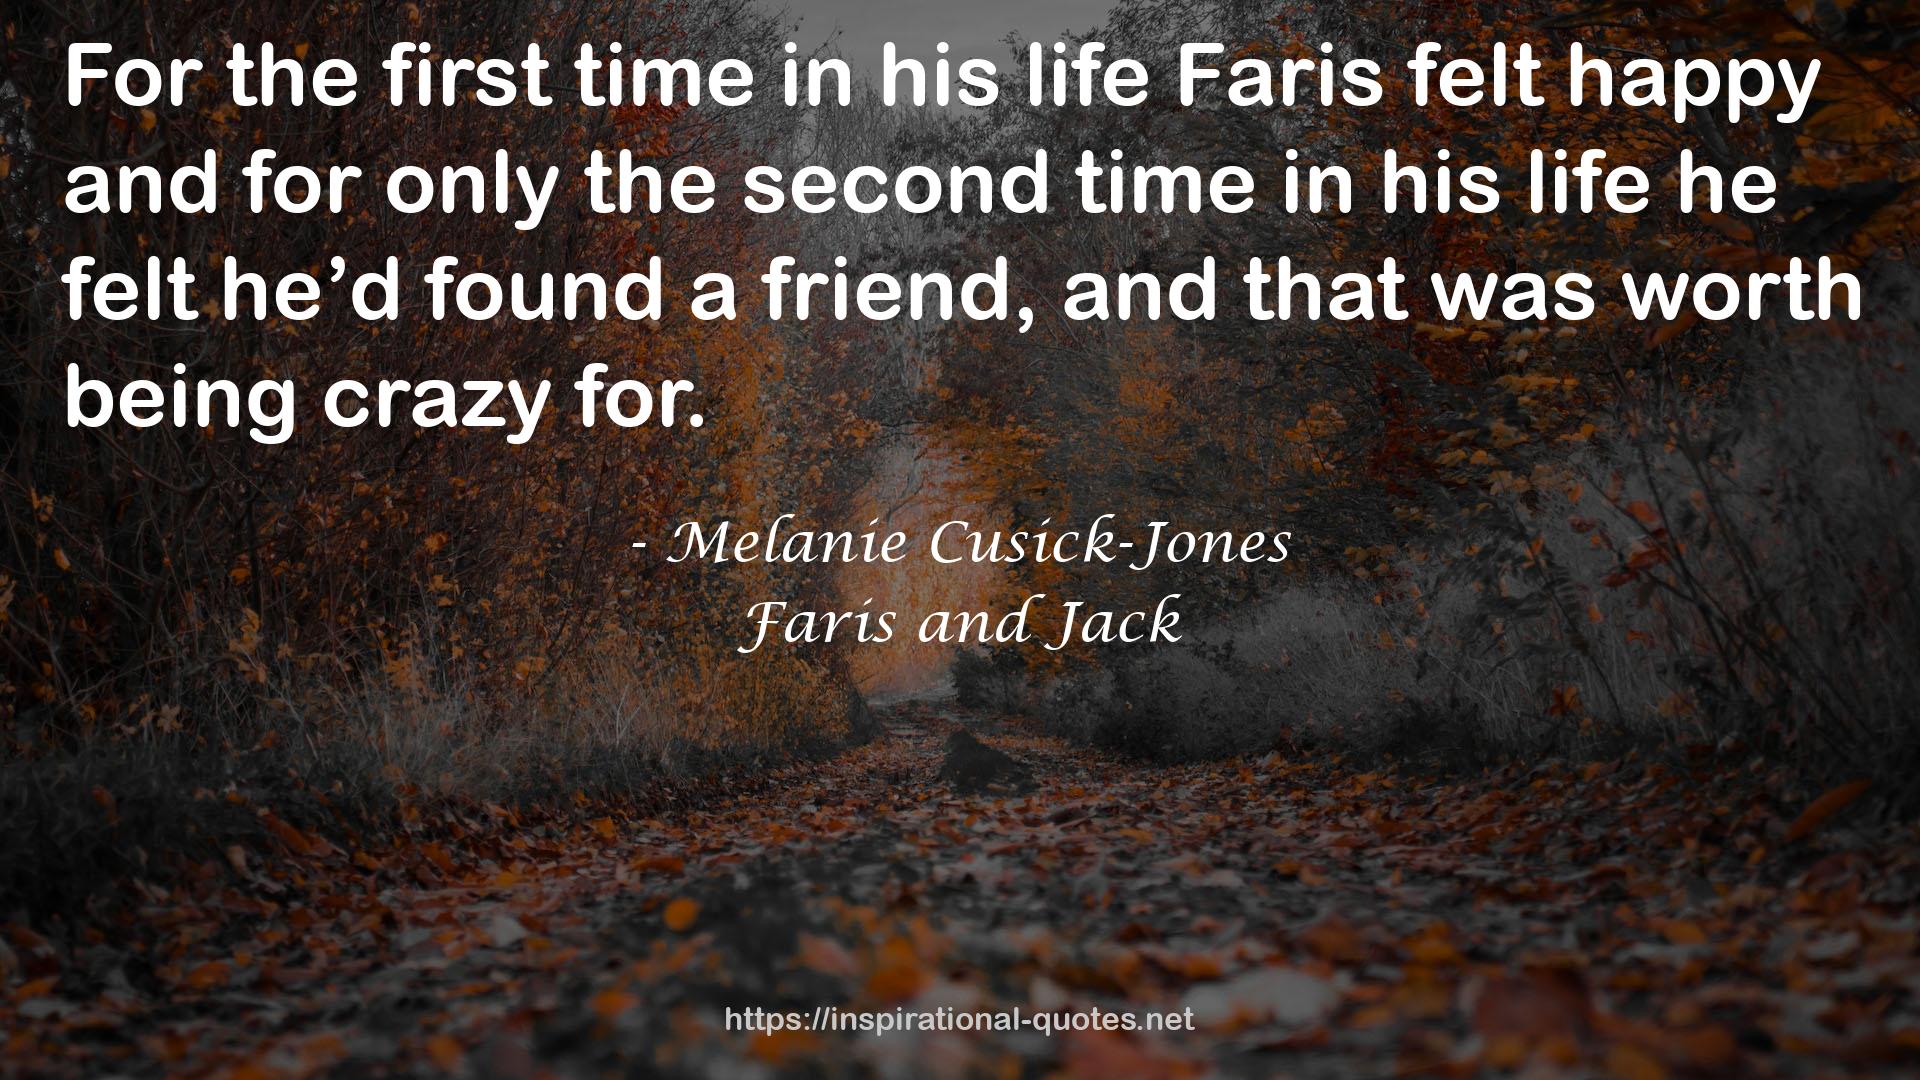 Faris and Jack QUOTES